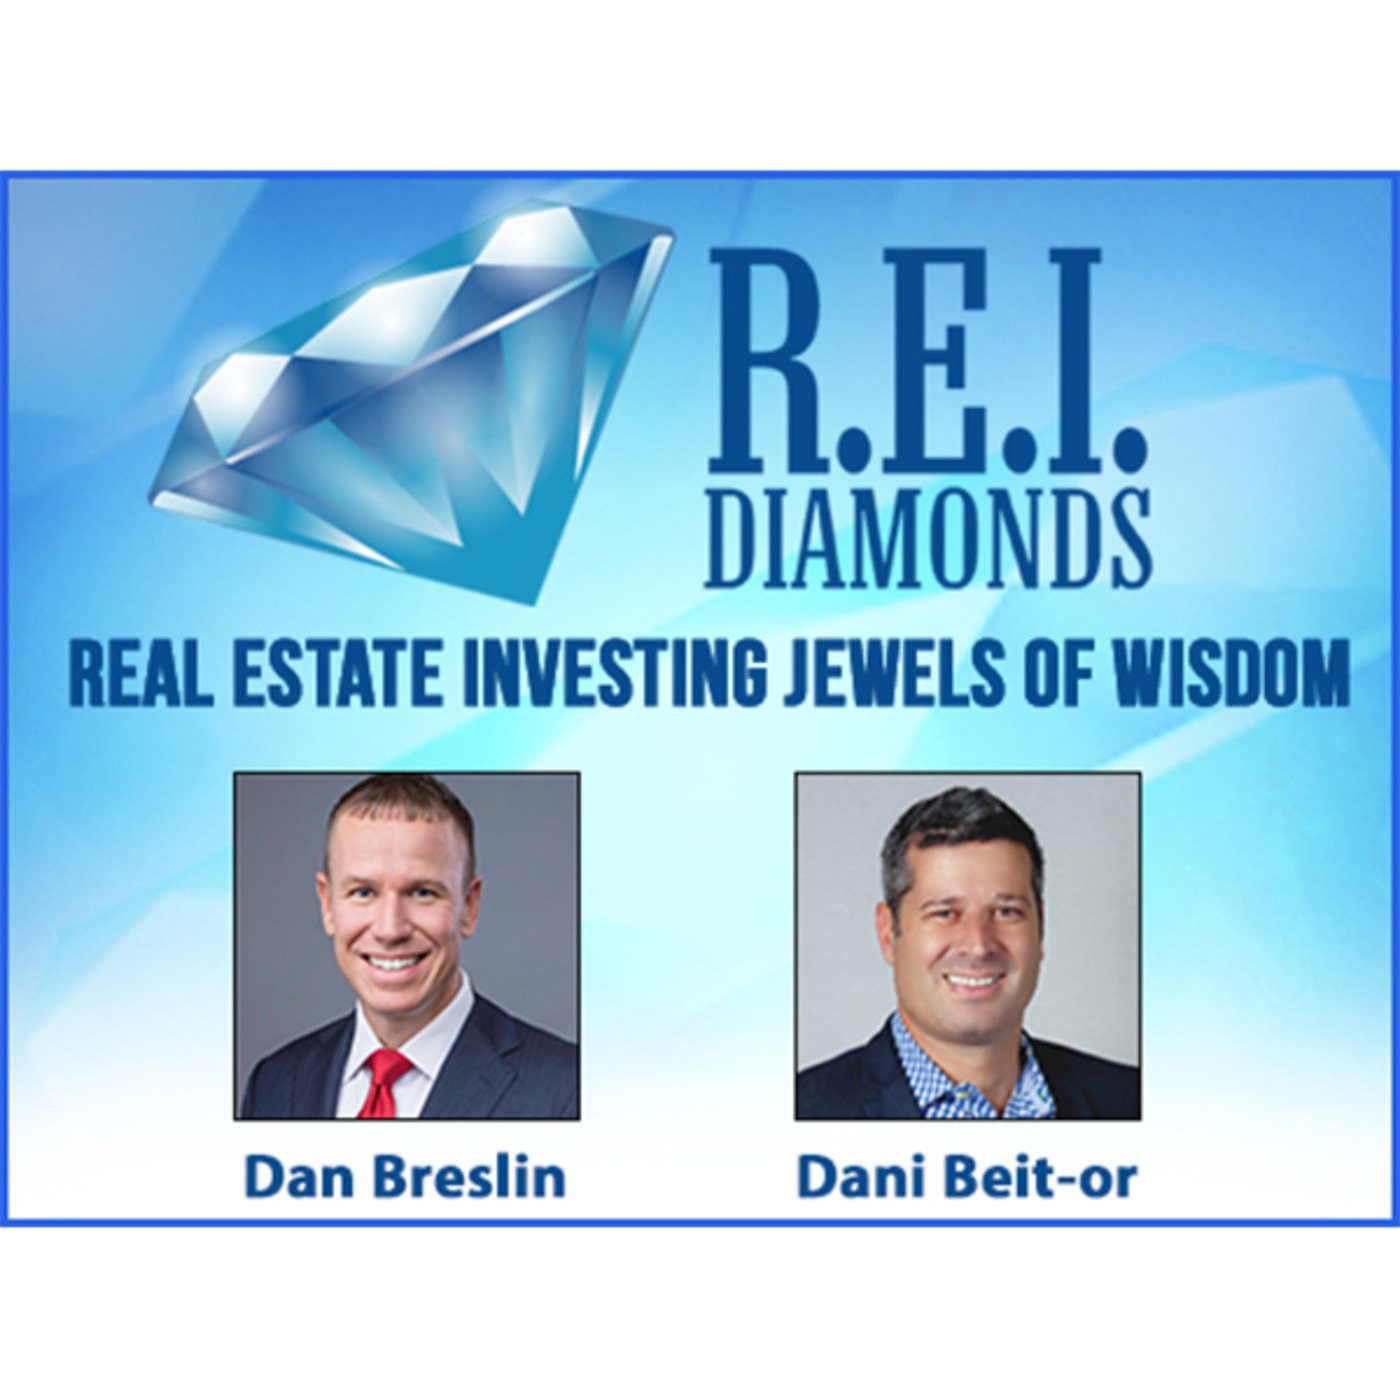 Episode 216: Dani Beit-or: Leveraging Repetition and Reinforcement in Real Estate Investments